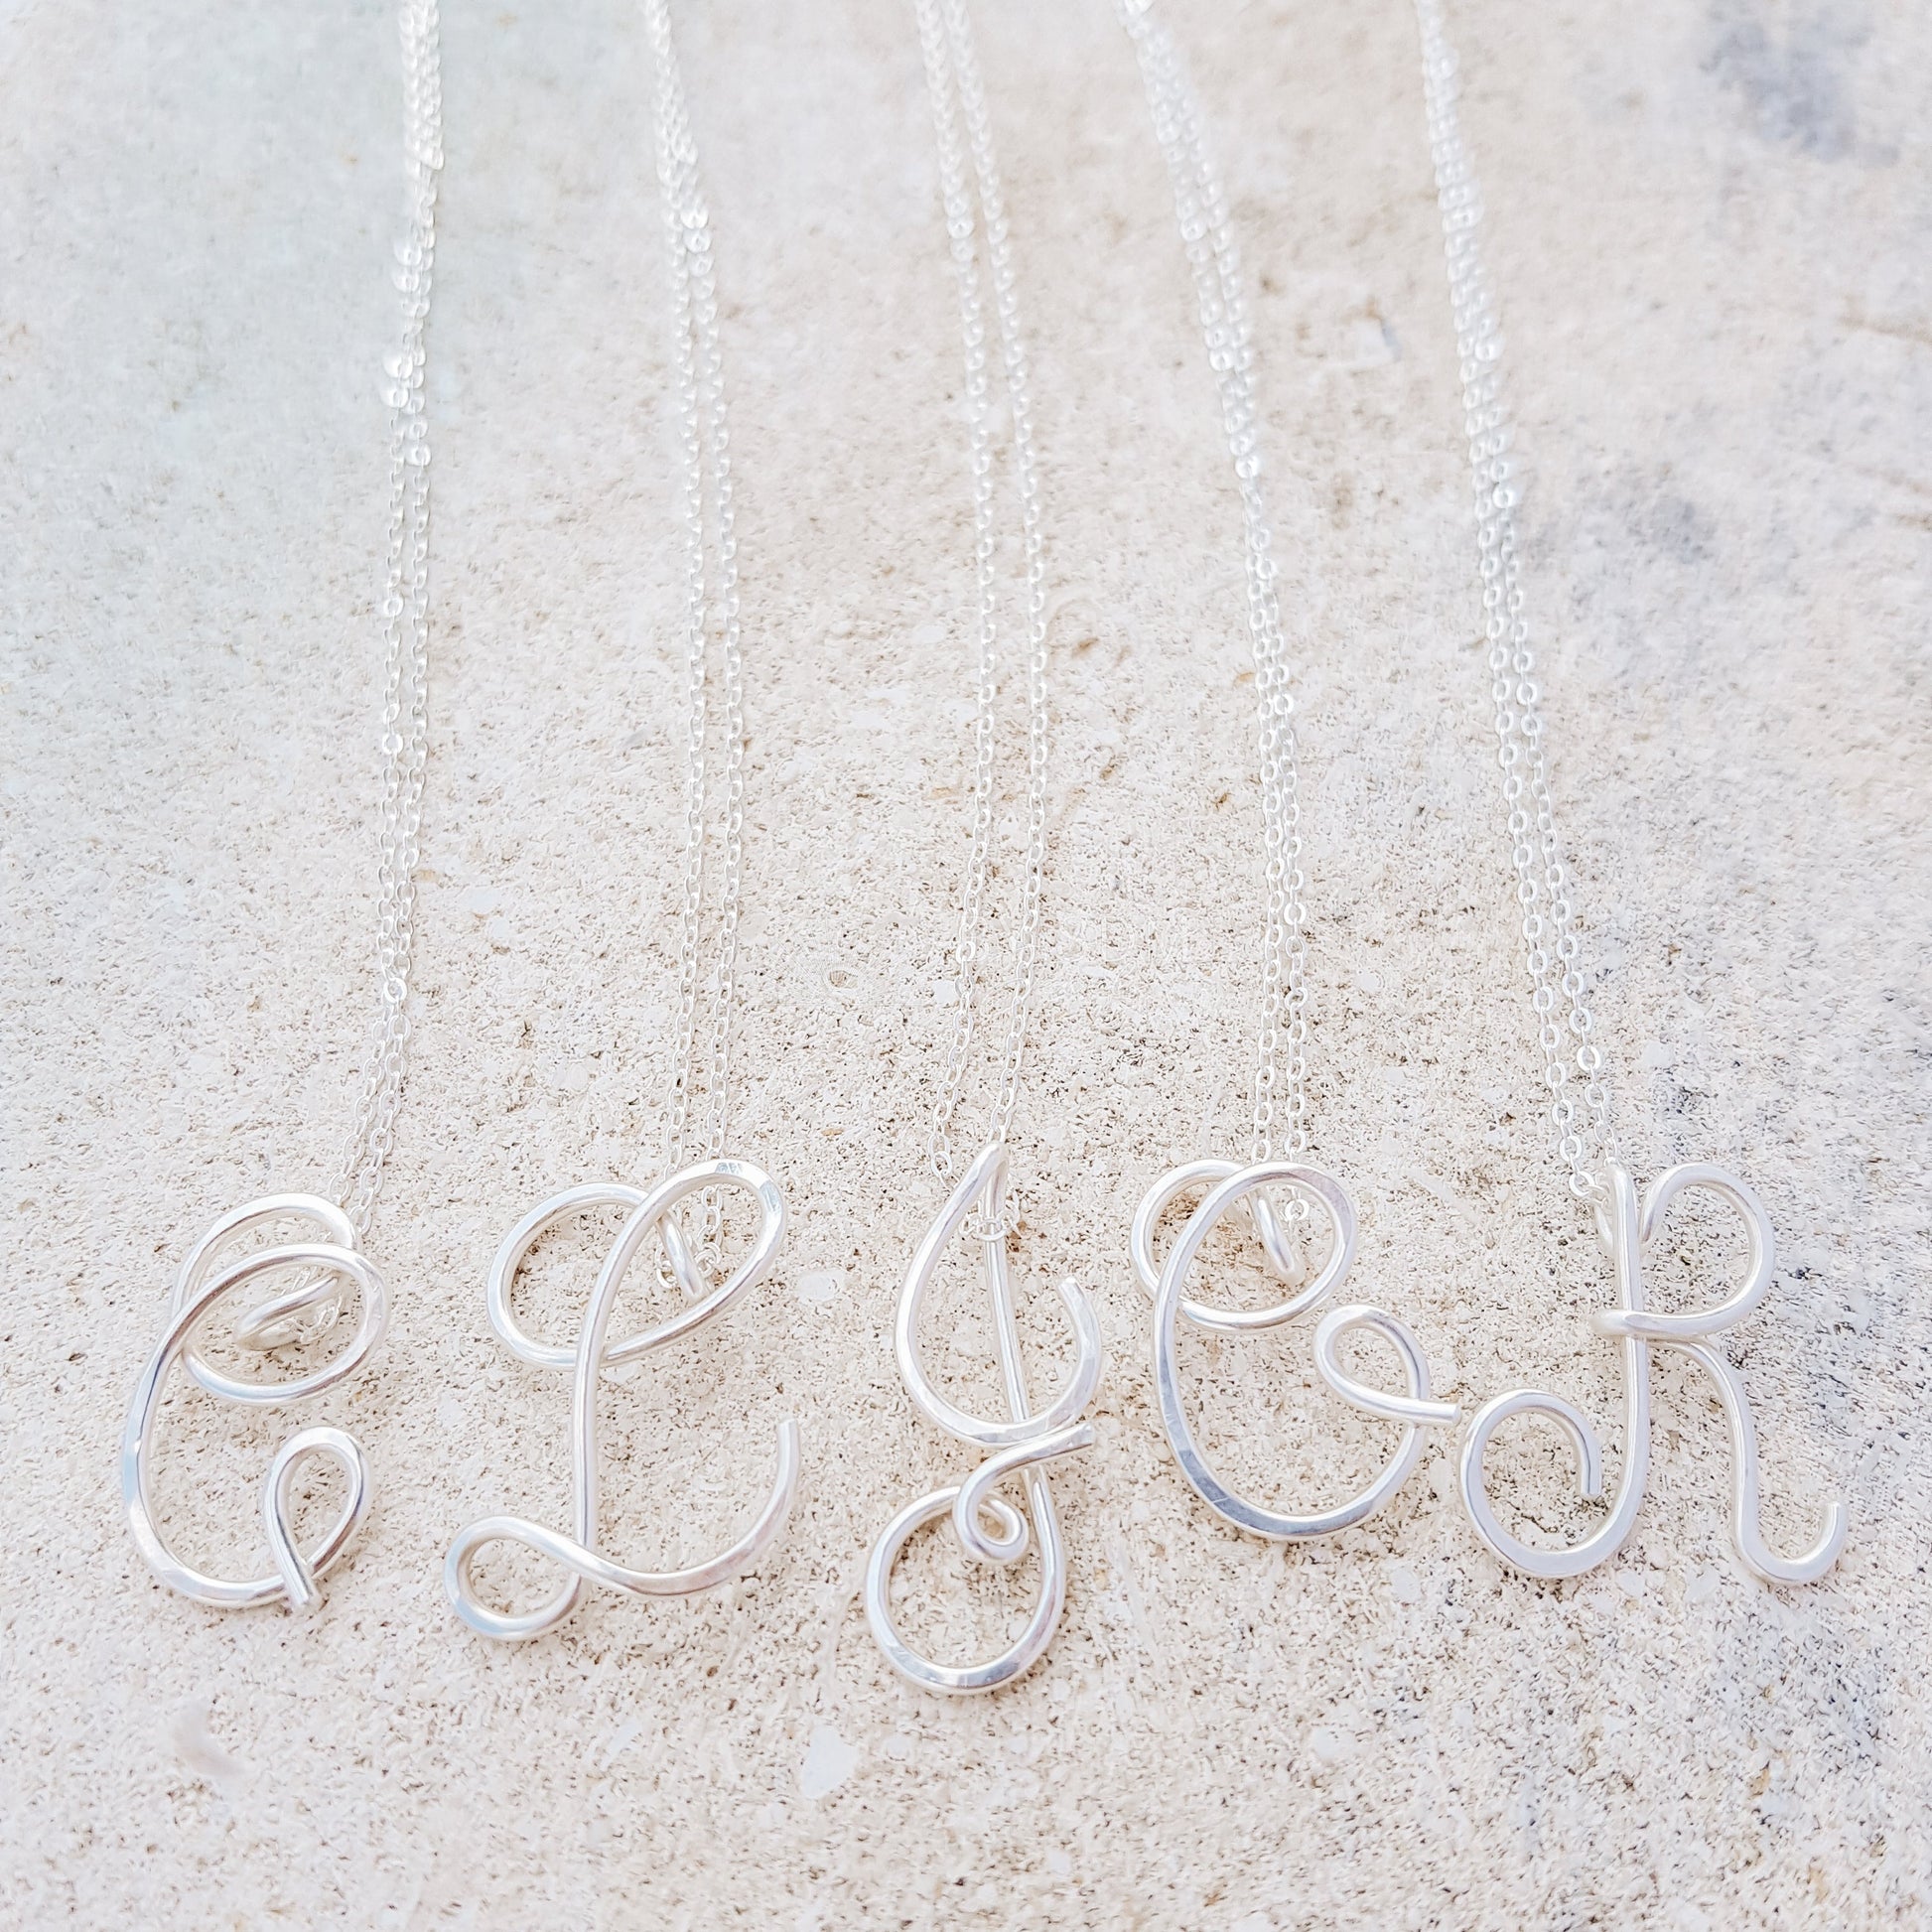 J Custom Letter Necklace • Personalized Name Necklace • J Custom Initials Necklace • Personalized Gift • Mother's Day Gift